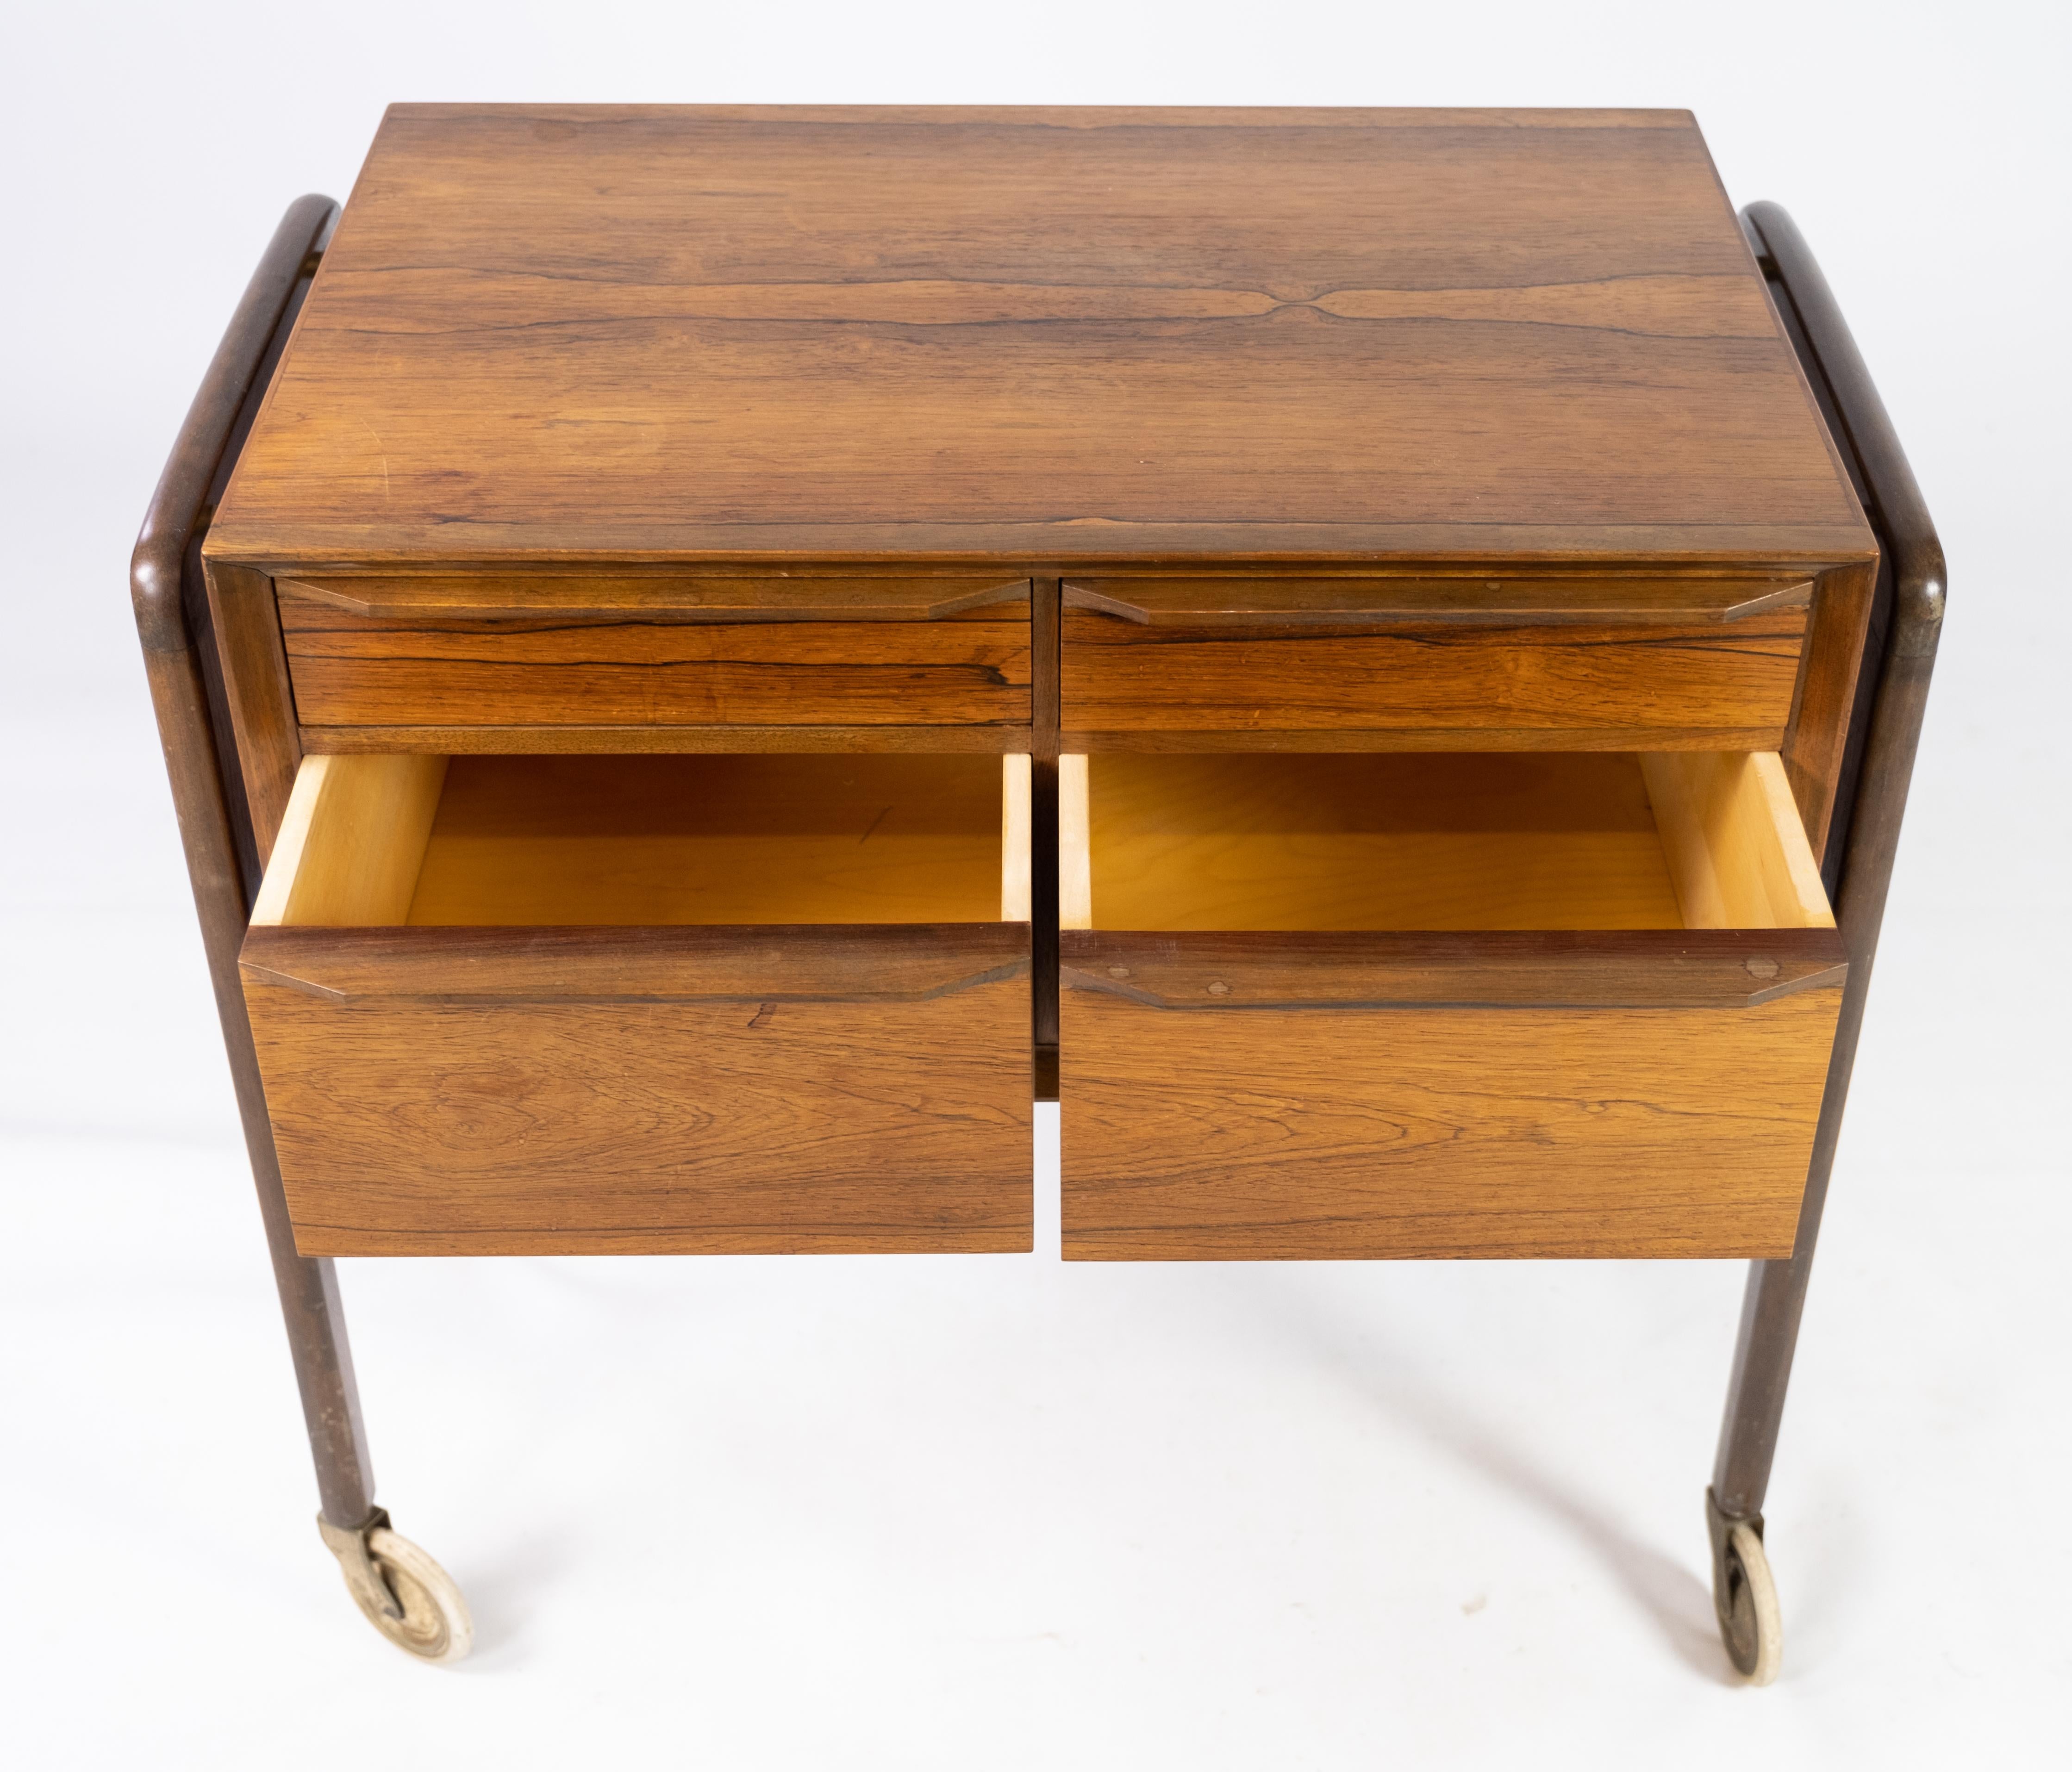 Small Chest of Drawers on Wheels in Rosewood of Danish Design from the 1960s For Sale 2